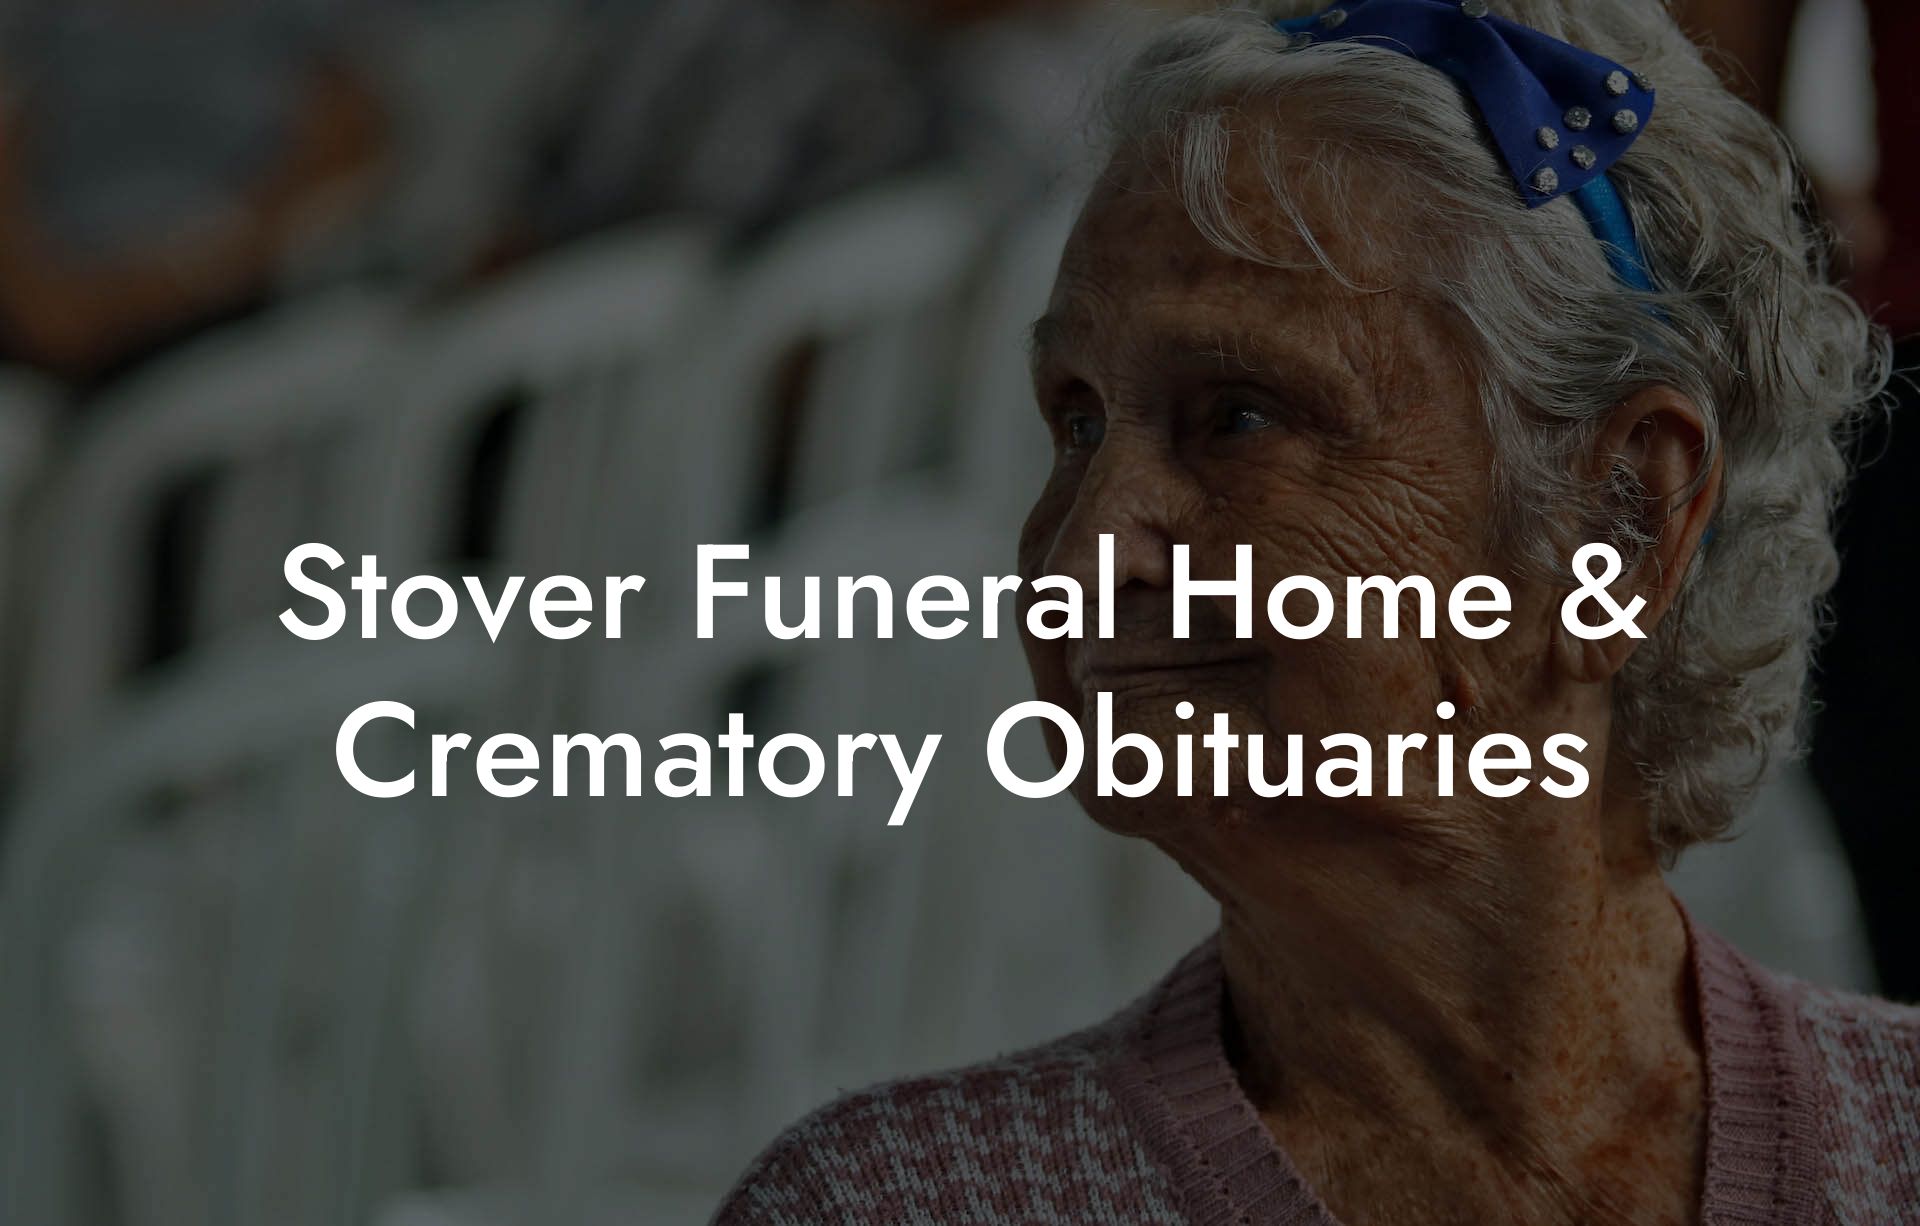 Stover Funeral Home & Crematory Obituaries